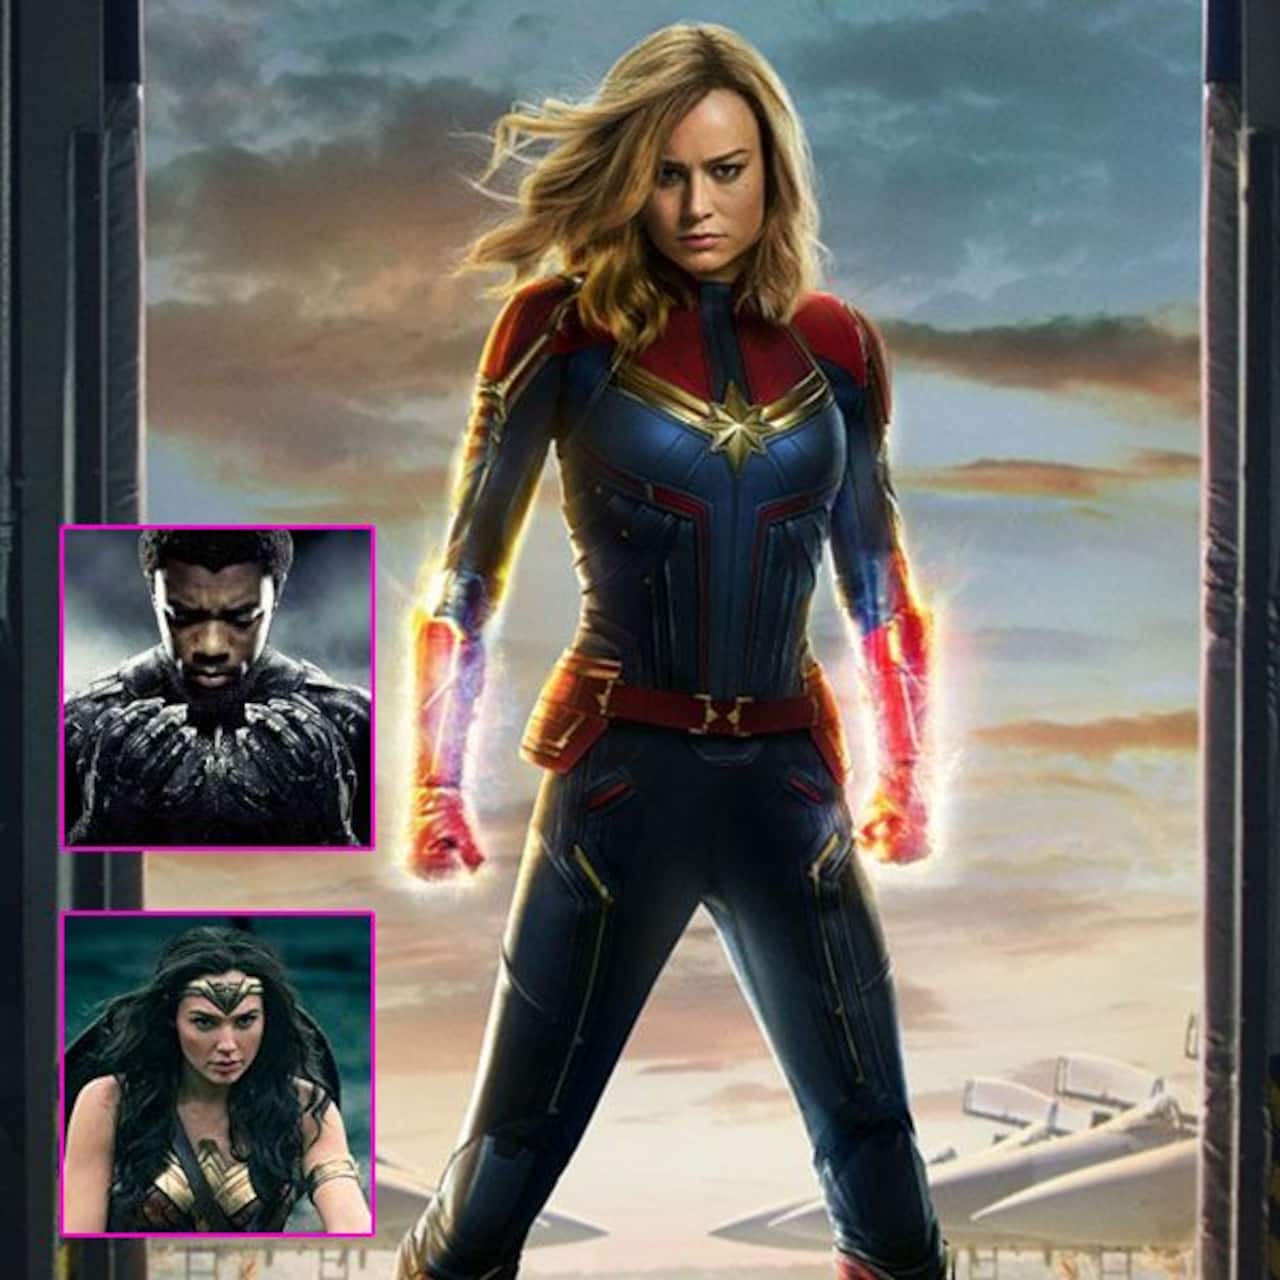 Box office predictions: Captain Marvel to BEAT Wonder Woman, Black Panther  and these superhero films on its first day in India - Bollywood News &  Gossip, Movie Reviews, Trailers & Videos at